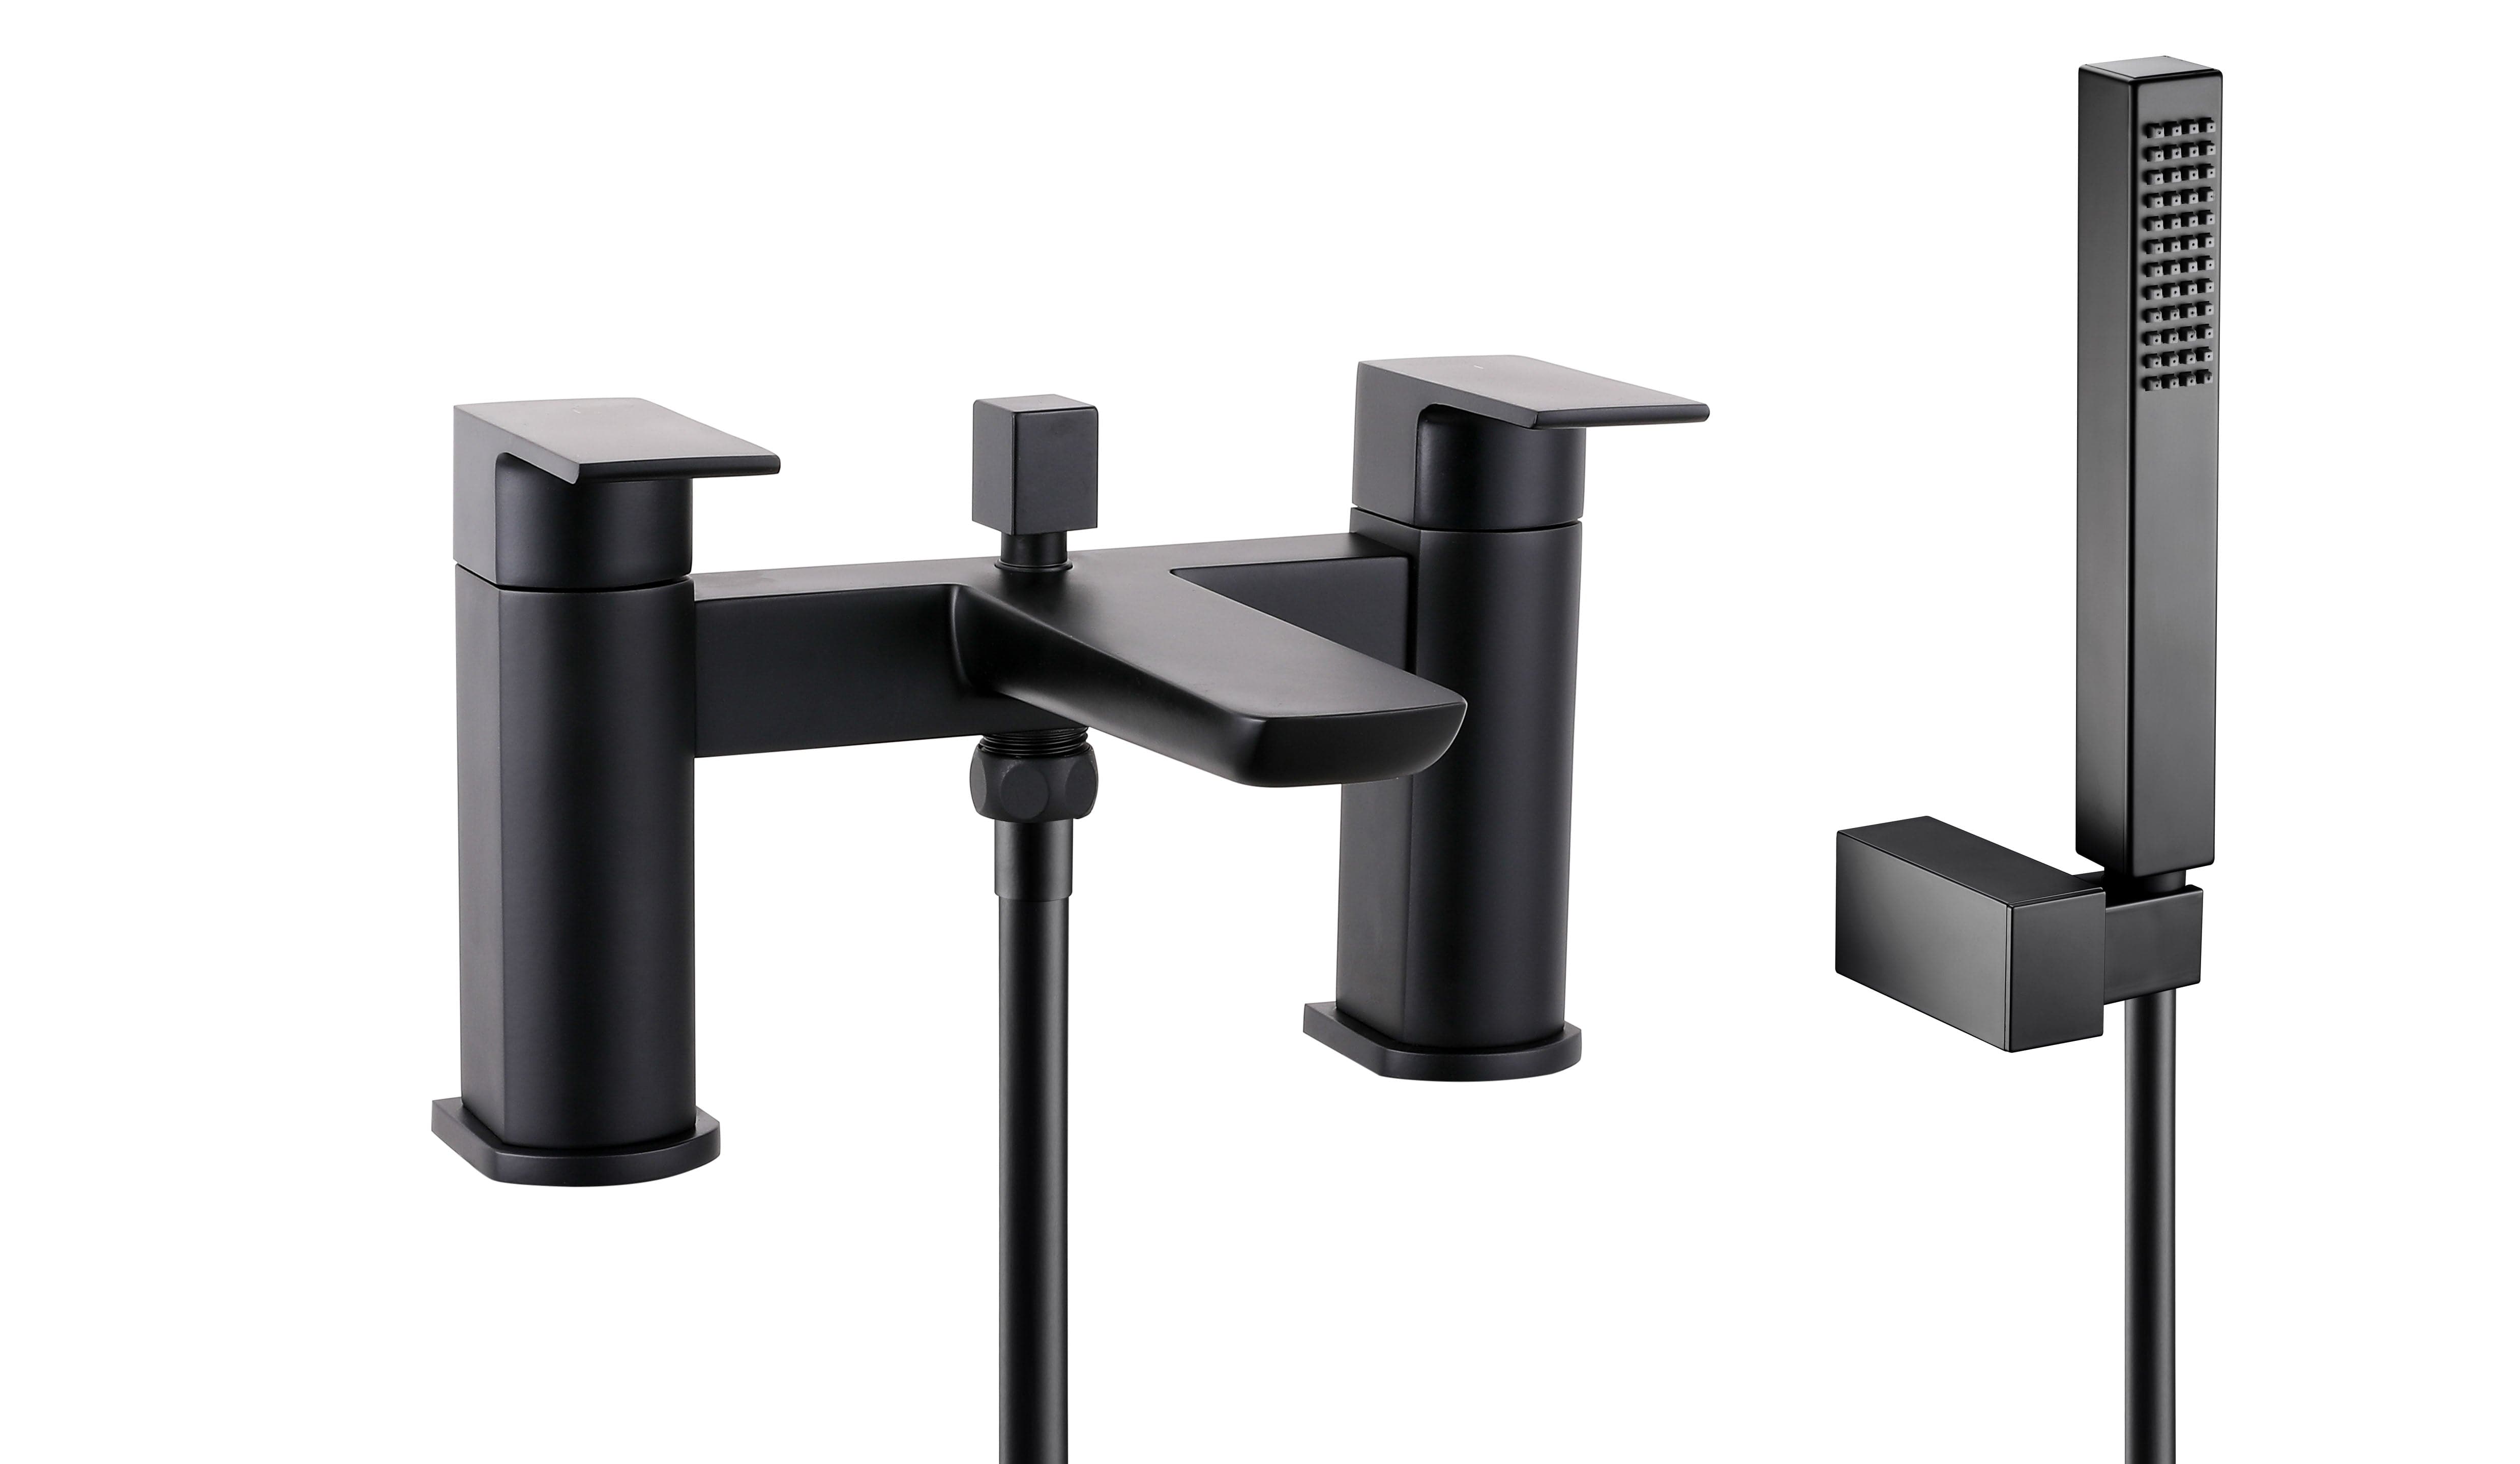 Lunar Soft Square Bath Shower Mixer Tap with Kit - Matt Black, modern design, dual functionality, ideal for contemporary UK bathrooms, high-quality, sleek finish.